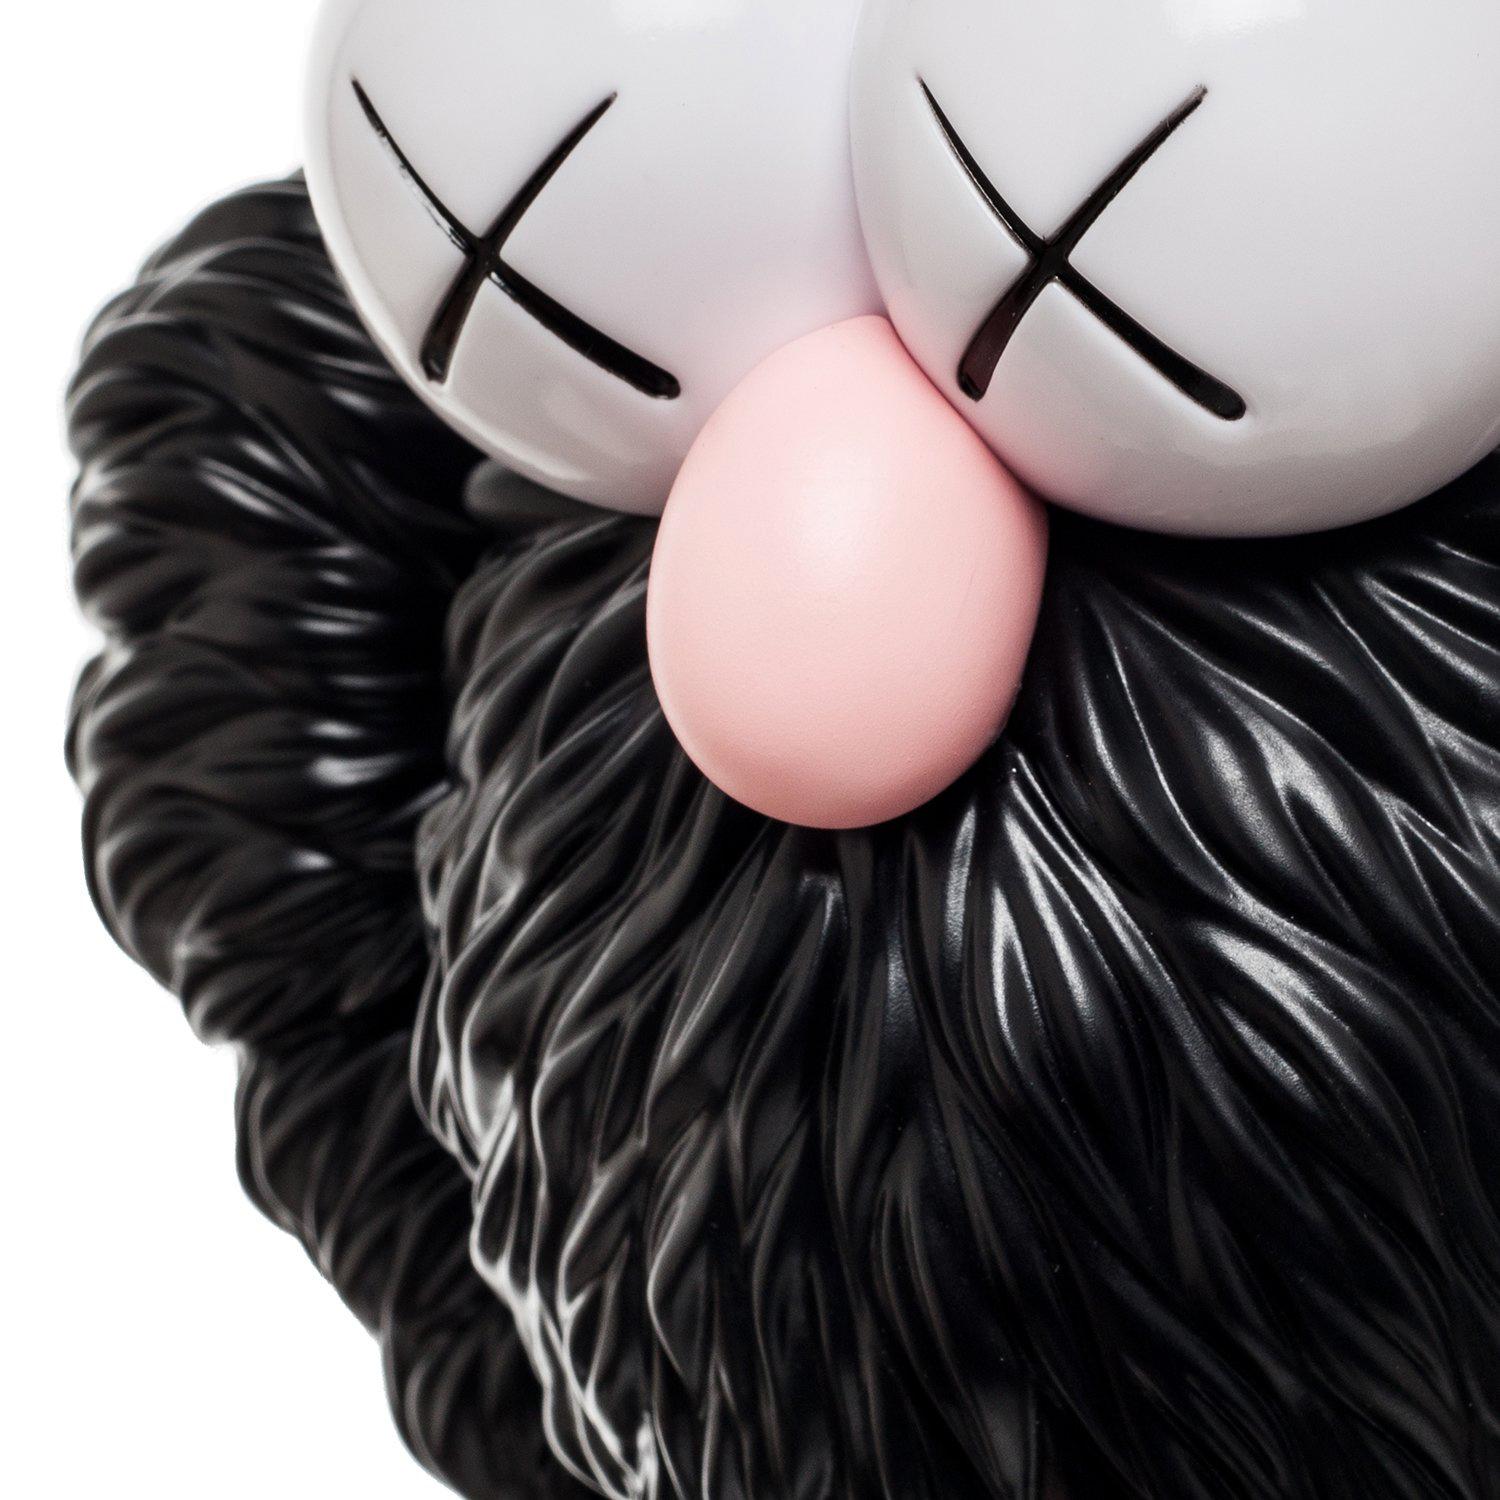 KAWS Black & Pink BFF (set of 2) new, unopened in its original packaging. 
A well-received variation of KAWS' large scale BFF sculpture is in Los Angeles's Playa Vista neighborhood. 

Medium: Painted Vinyl & Cast Resin.
Published by Medicom Japan.